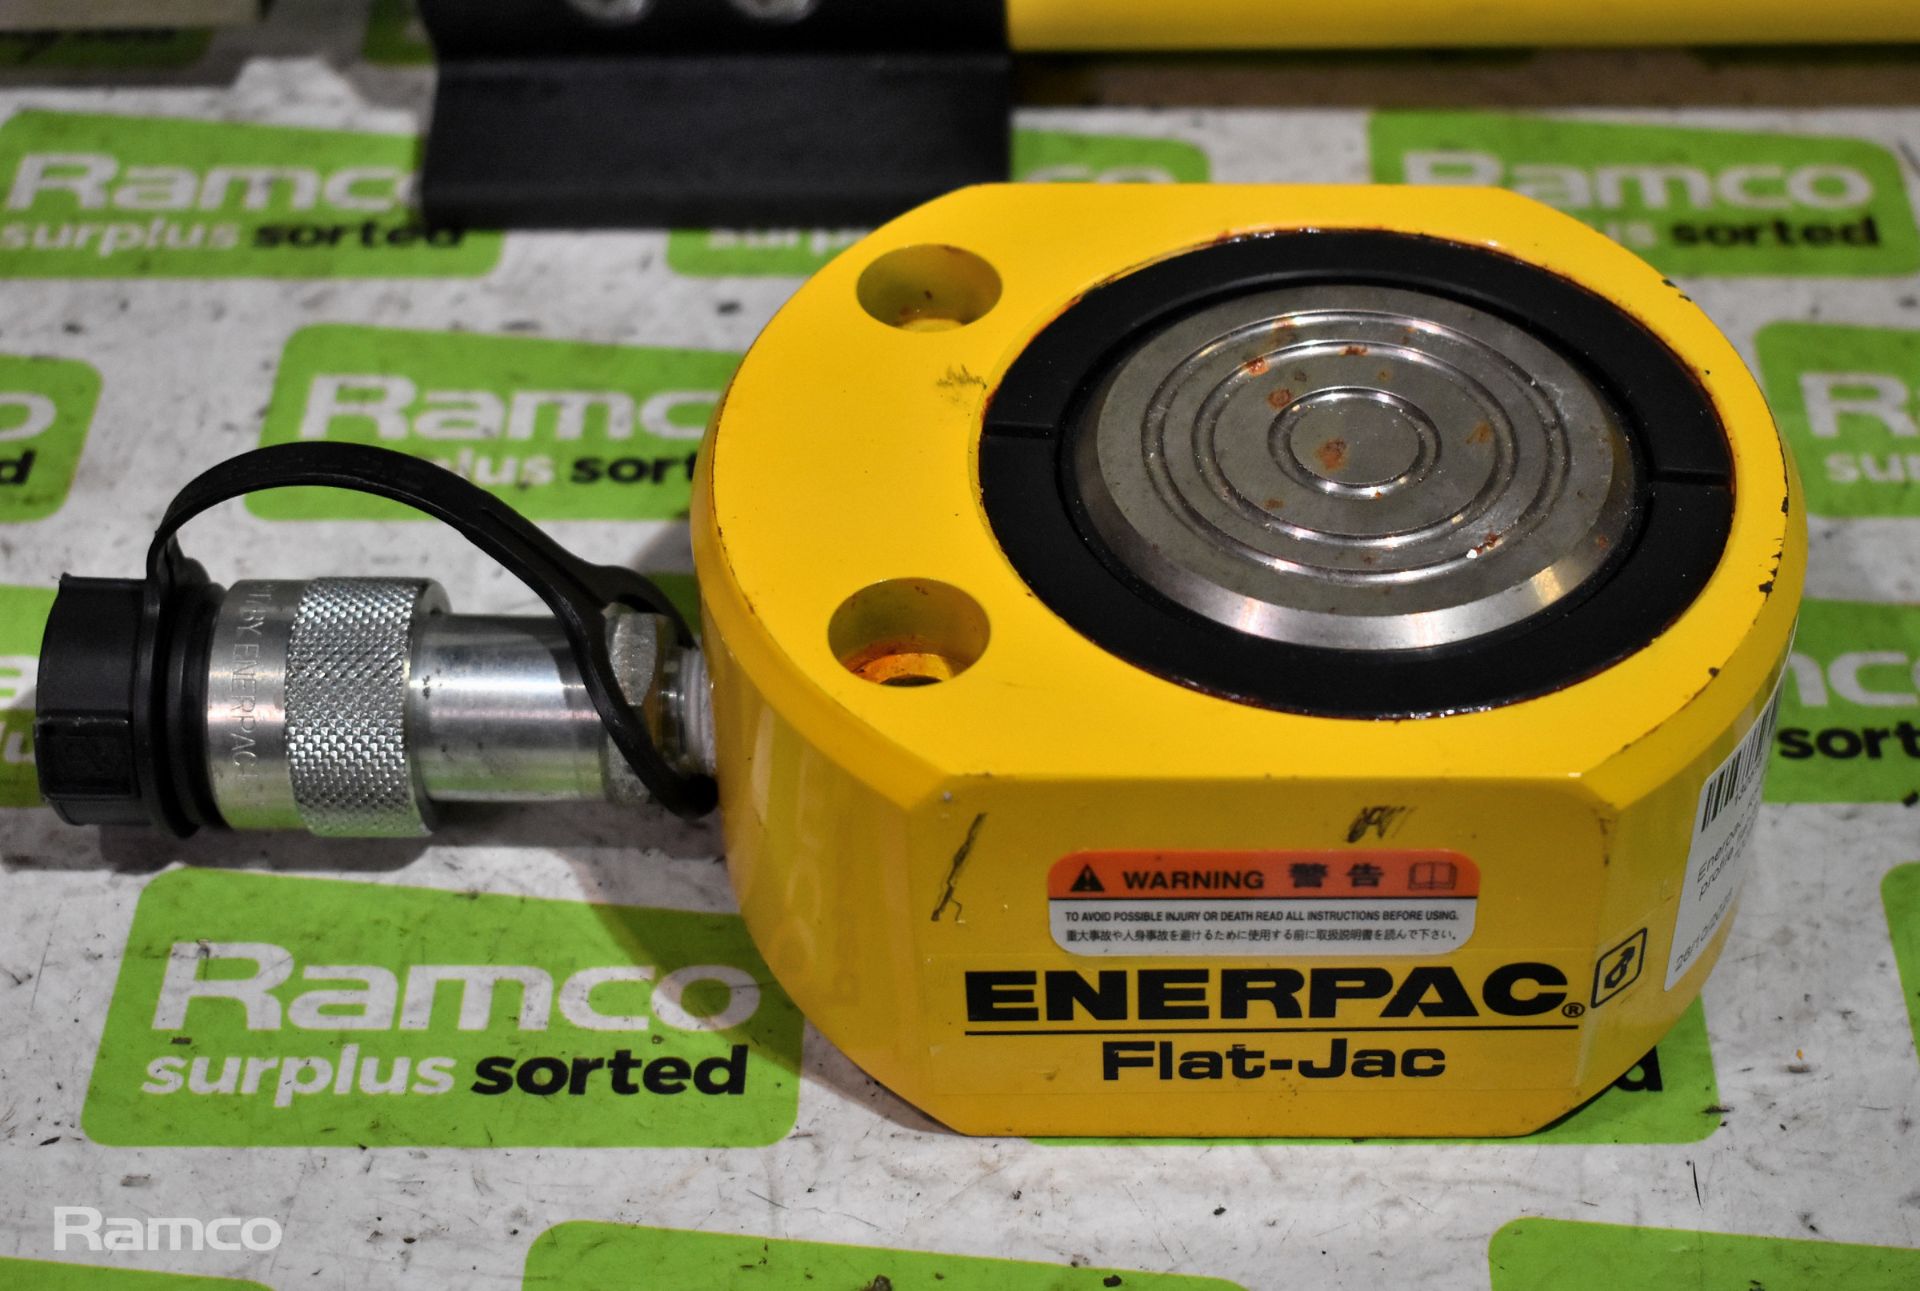 Enerpac P932 two speed hydraulic hand pump - 10000 PSI / 700 BAR max - Image 4 of 6